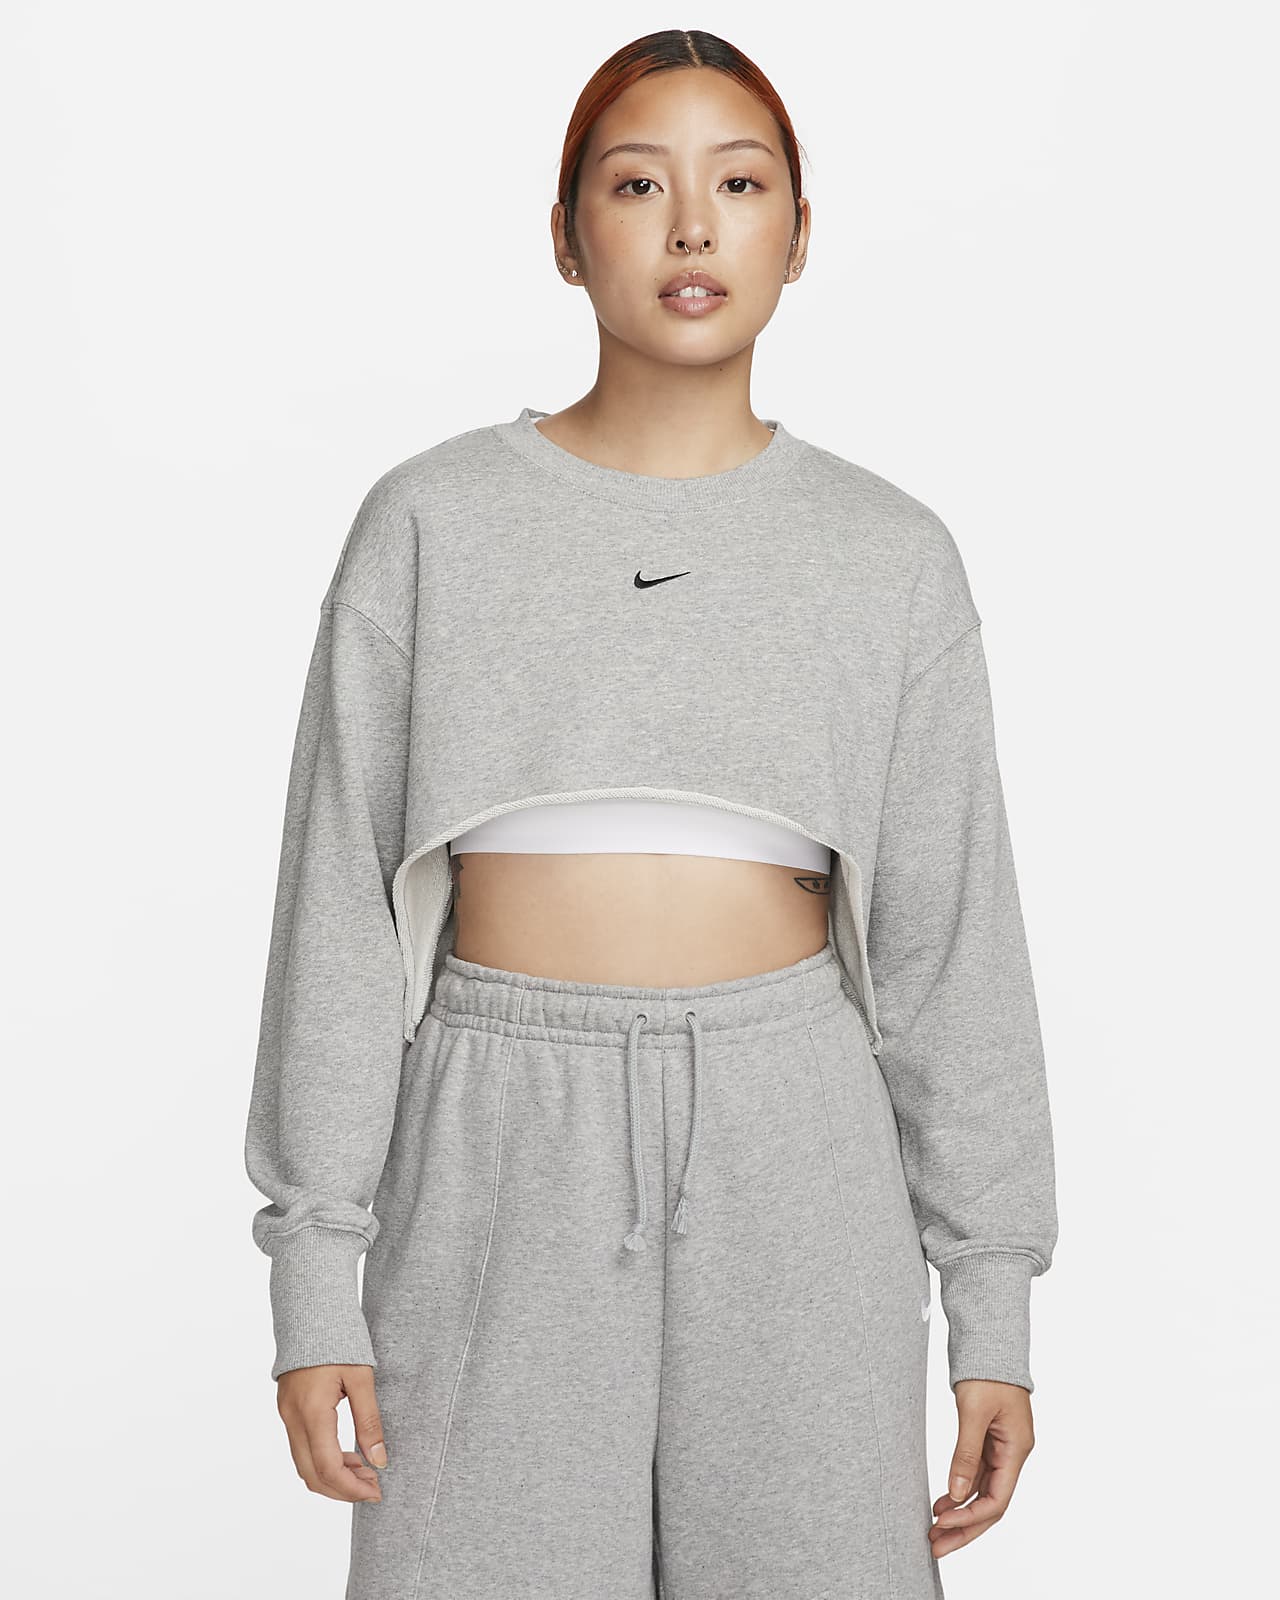 https://static.nike.com/a/images/t_PDP_1280_v1/f_auto,q_auto:eco/bc302313-900f-414b-968e-441ce2d6be72/sportswear-french-terry-crew-neck-crop-top-QCw7QT.png